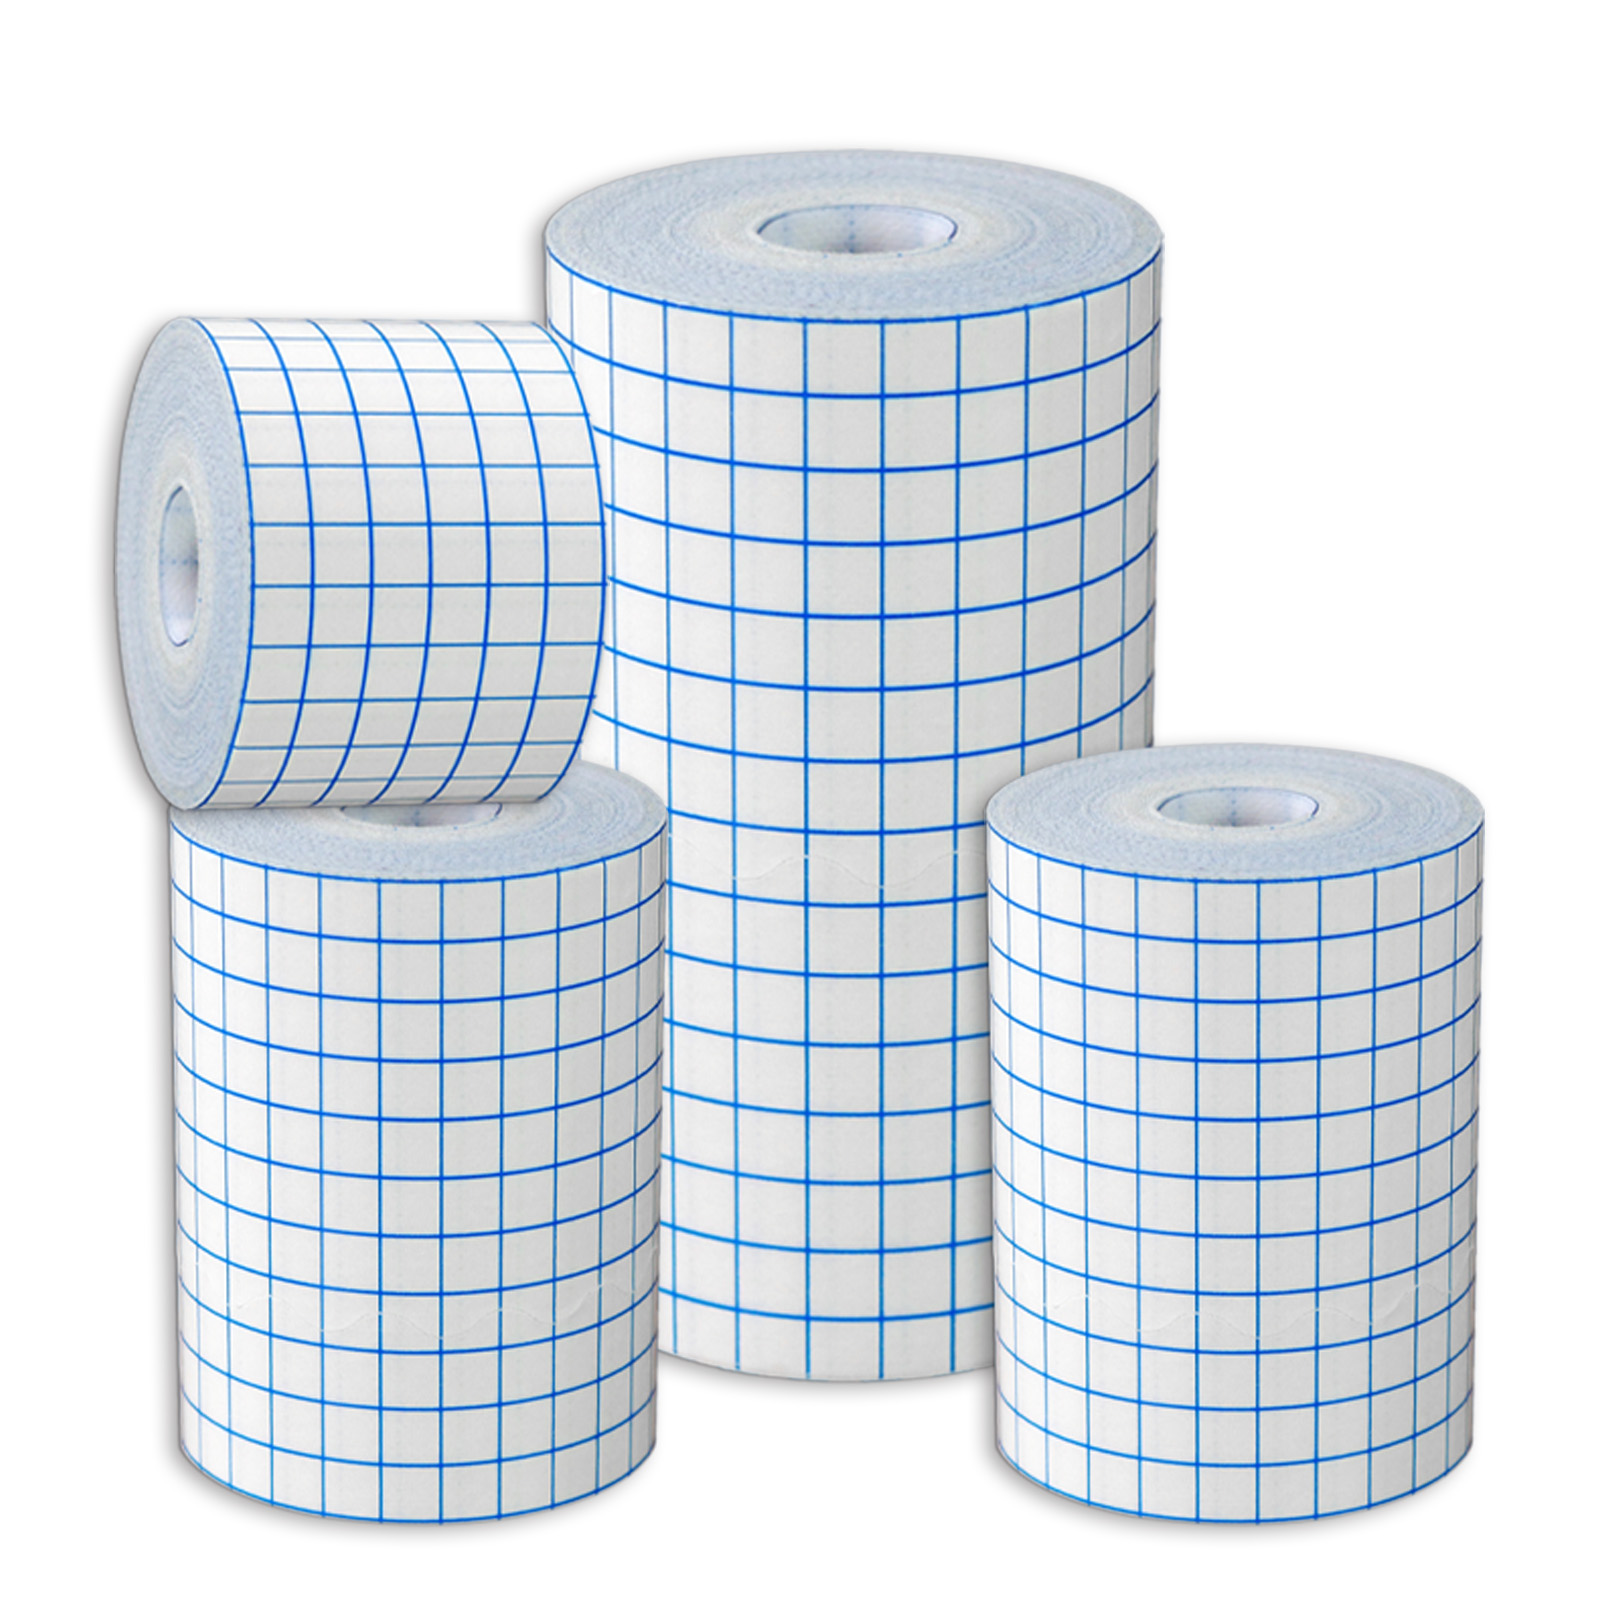 New Arrival China Gauze For Wounds - non-woven tape adhesive wound dressing roll breathable protective cover medical care film bandage –  Guangyi